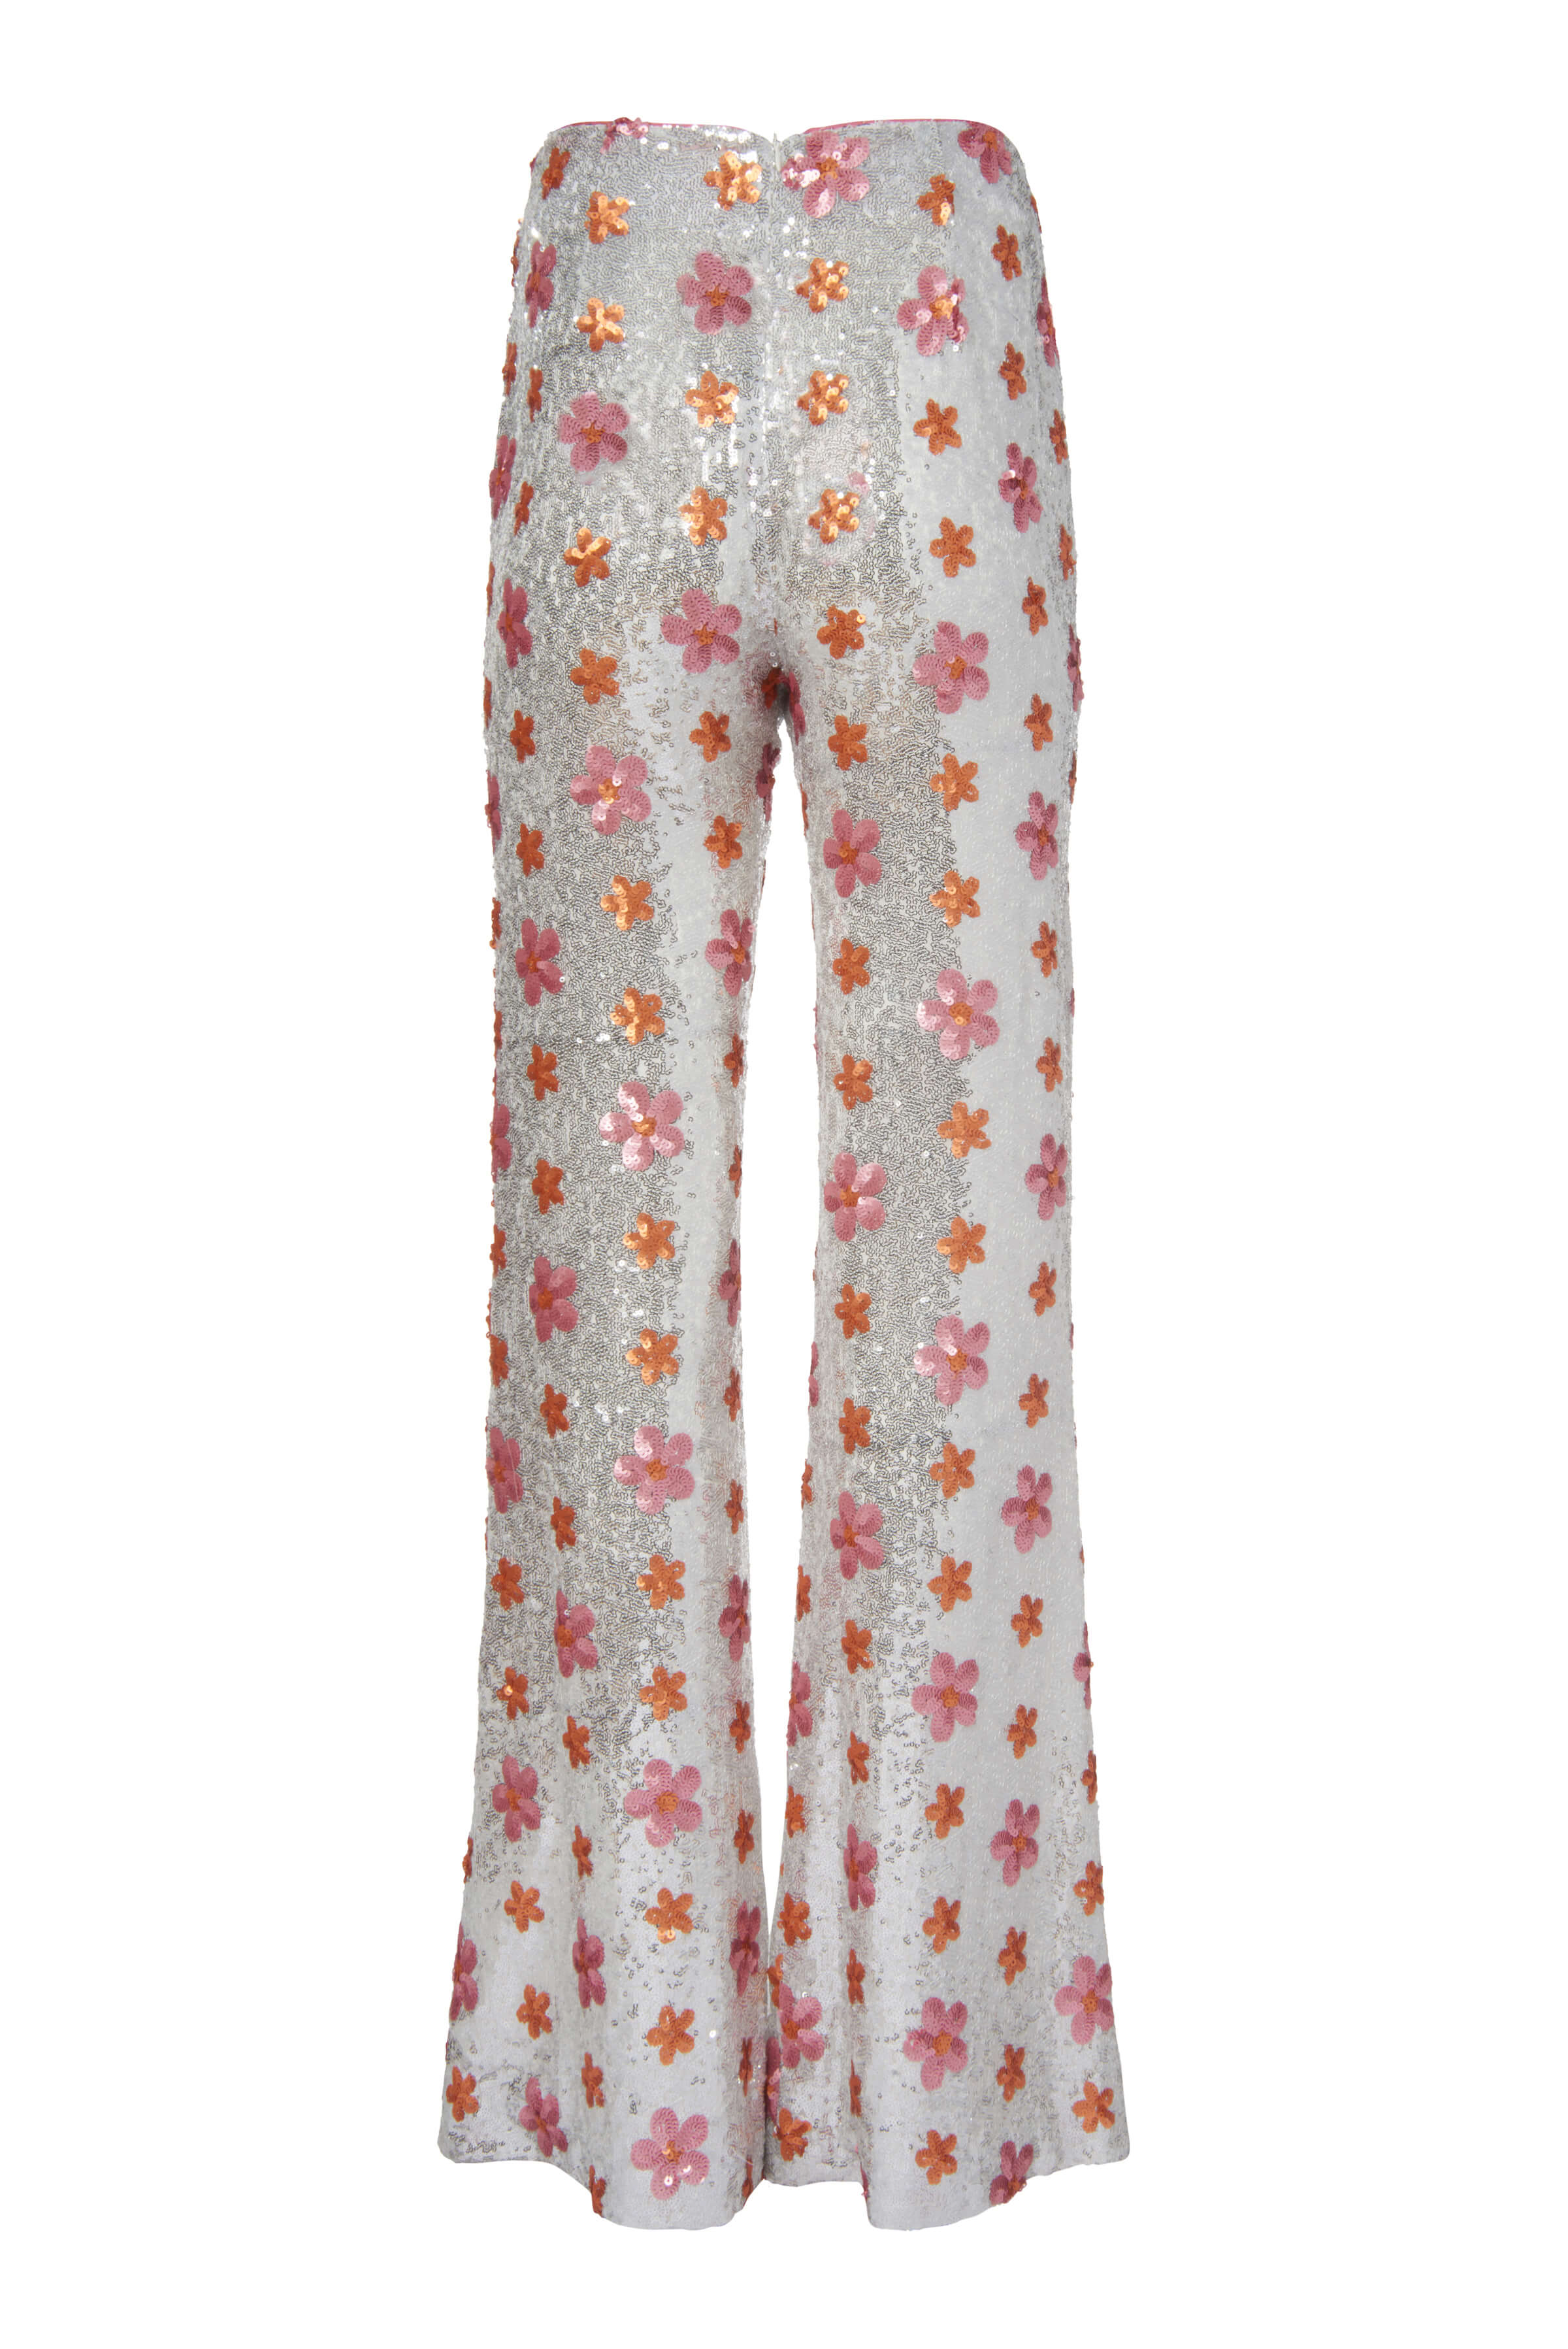 Ines Silver Sequin Floral Pant